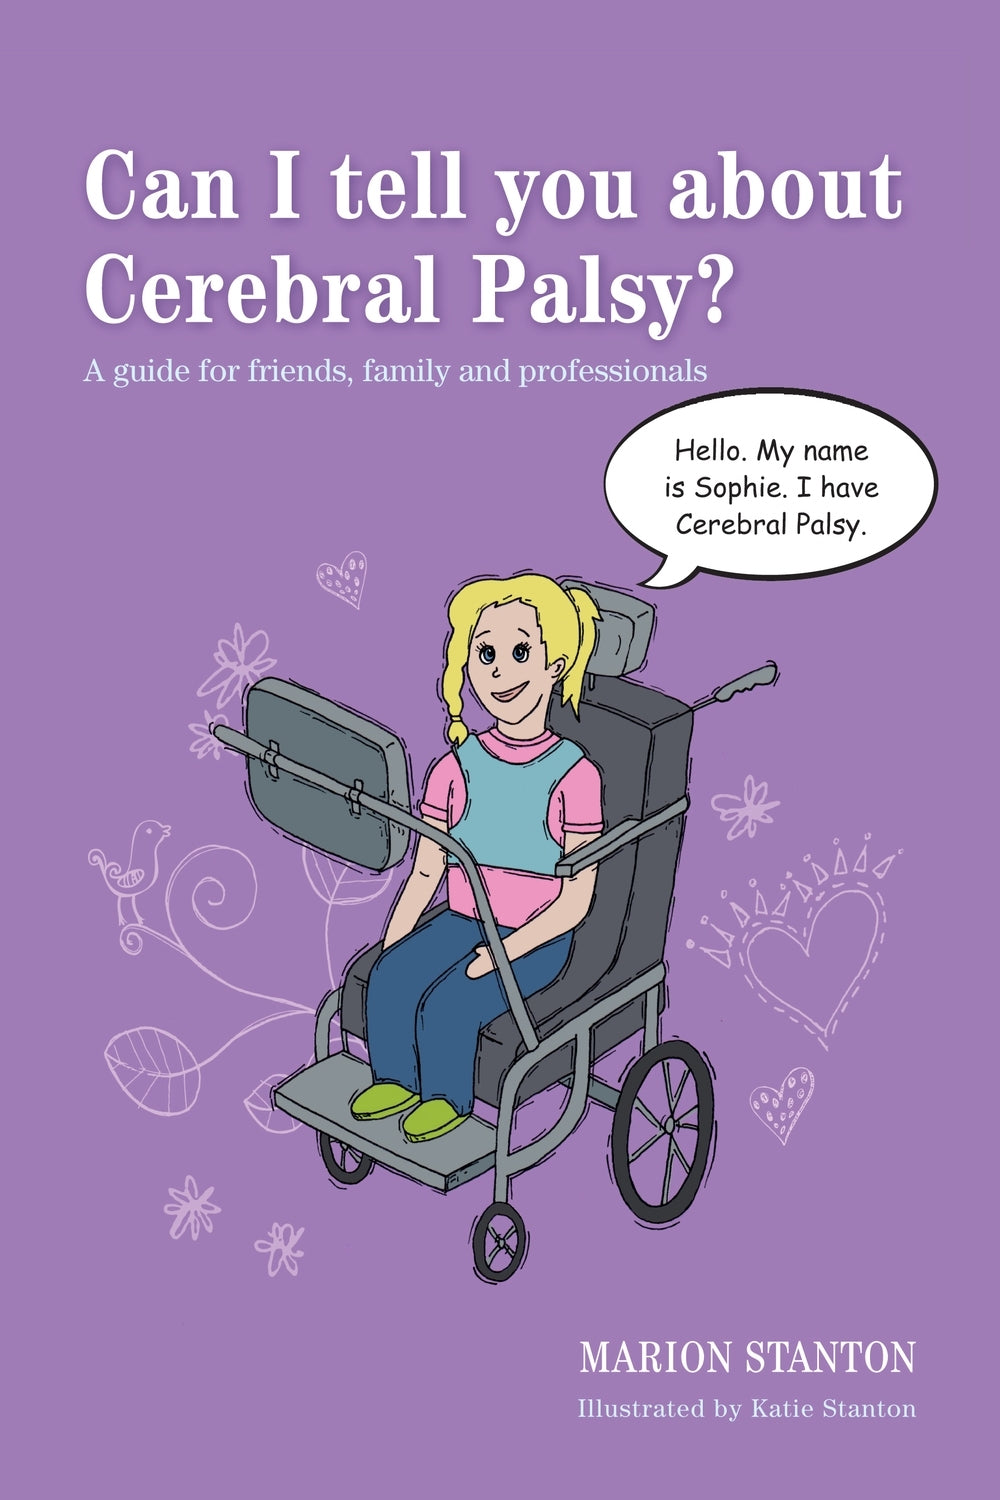 Can I tell you about Cerebral Palsy? by Katie Stanton, Marion Stanton